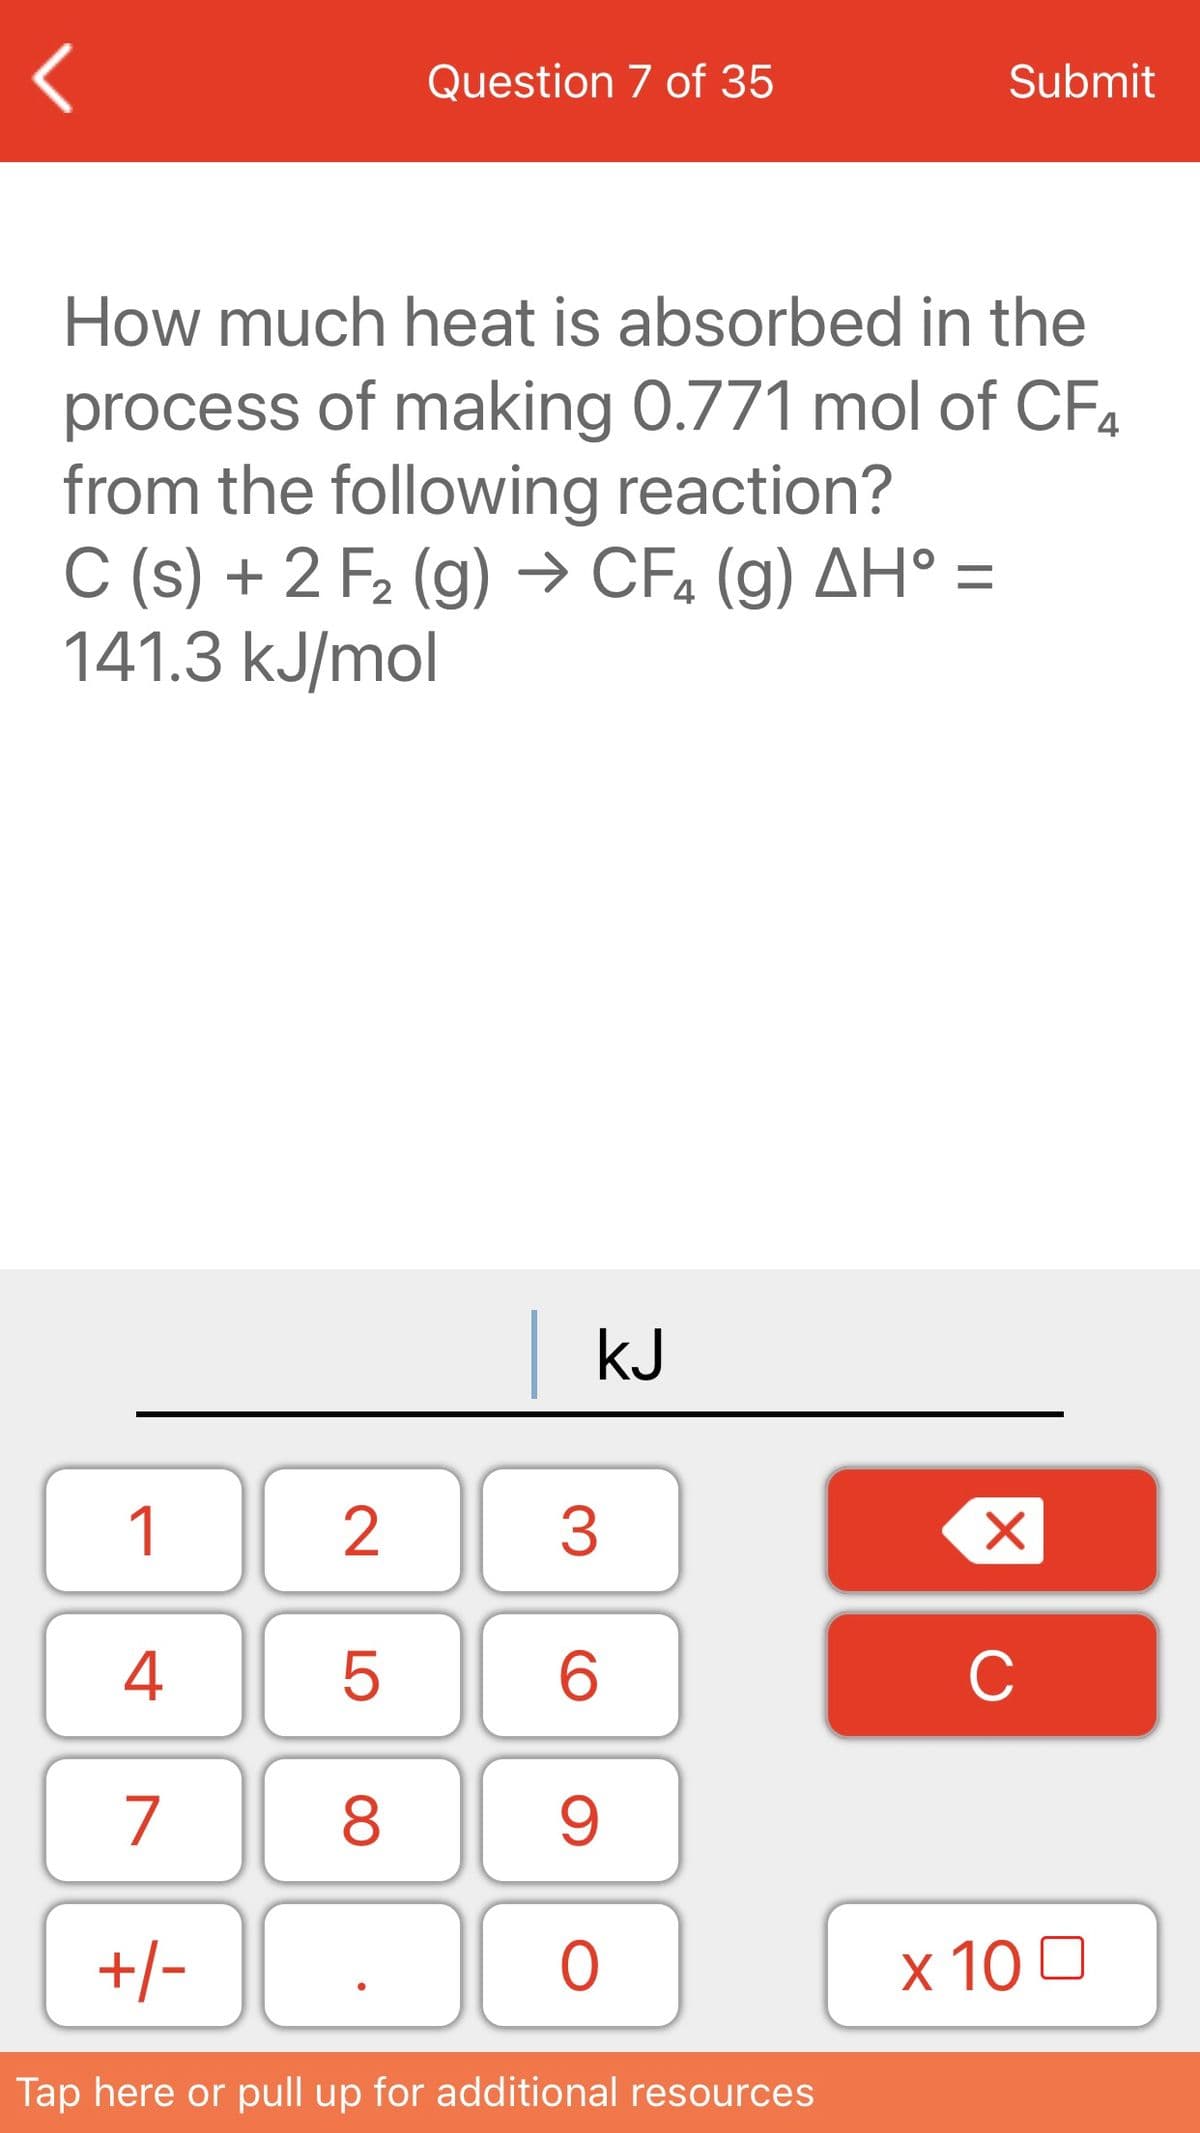 Question 7 of 35
Submit
How much heat is absorbed in the
process of making 0.771 mol of CF4
from the following reaction?
C (s) + 2 F2 (g) → CFa (g) AH° =
141.3 kJ/mol
|kJ
1
2
3
4
C
7
+/-
x 10 0
Tap here or pull up for additional resources
LO
00
